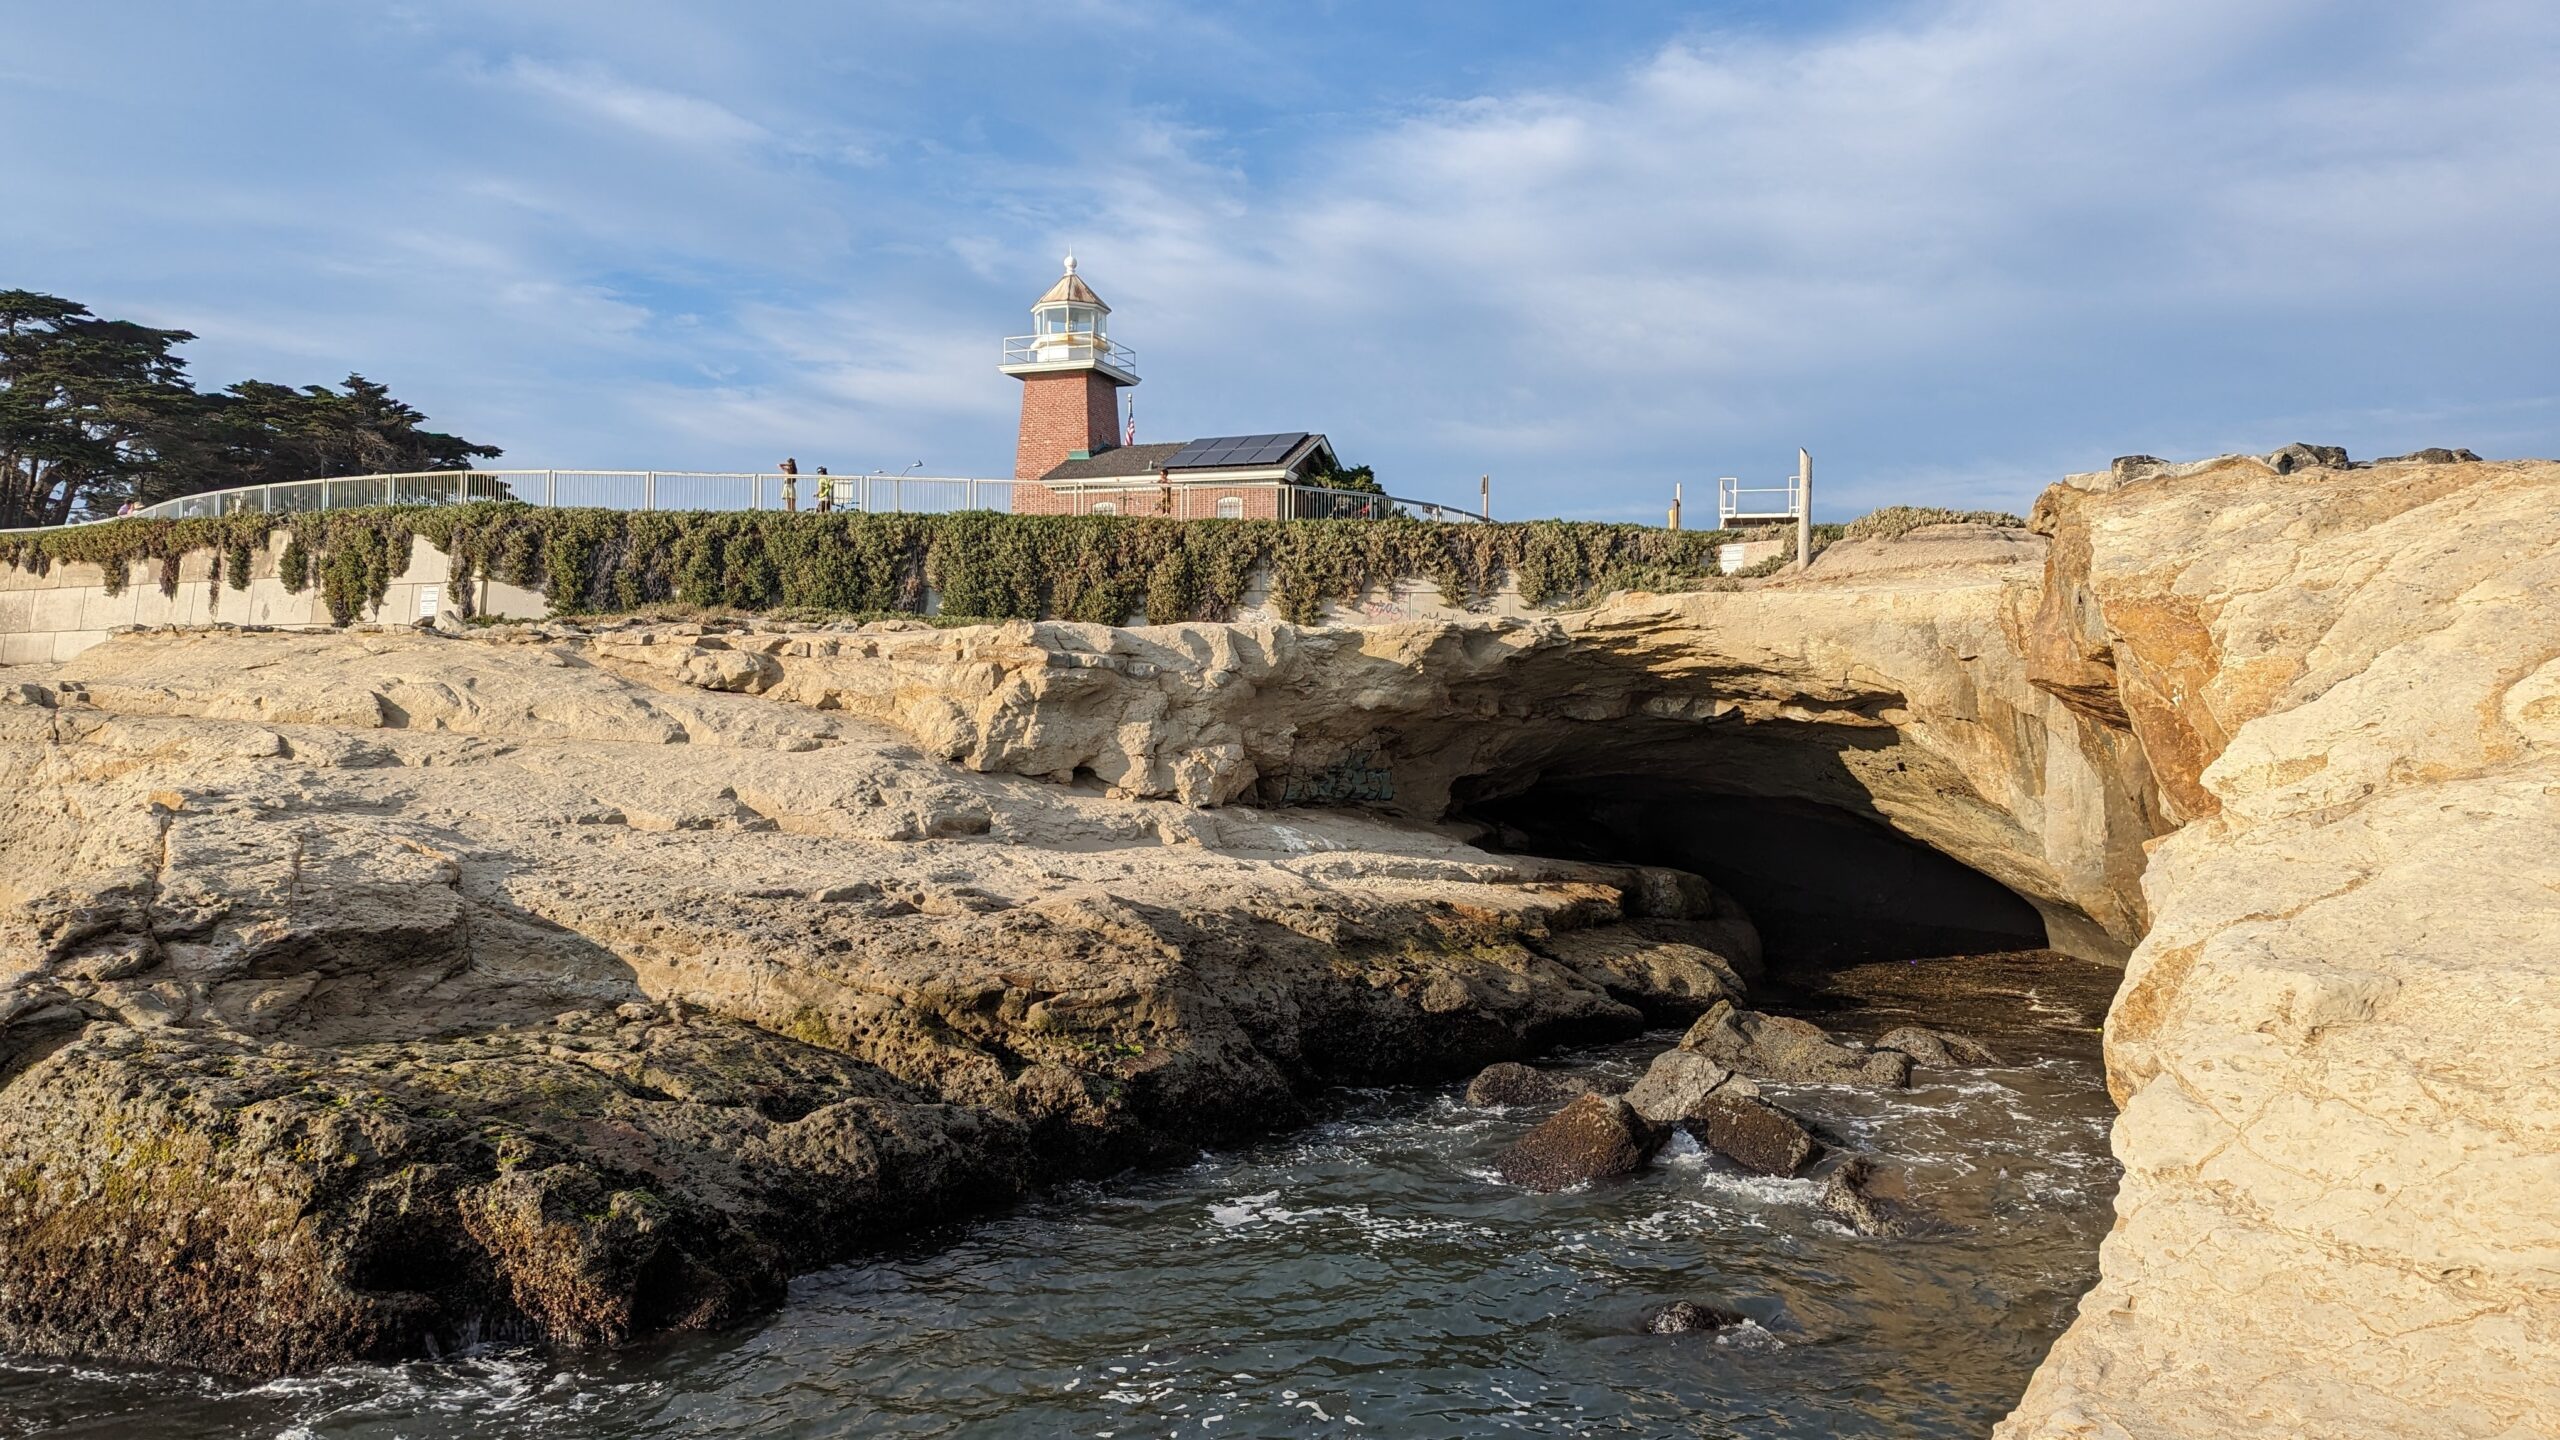 A "sea cave" is visible on West Cliff Drive below the lighthouse.